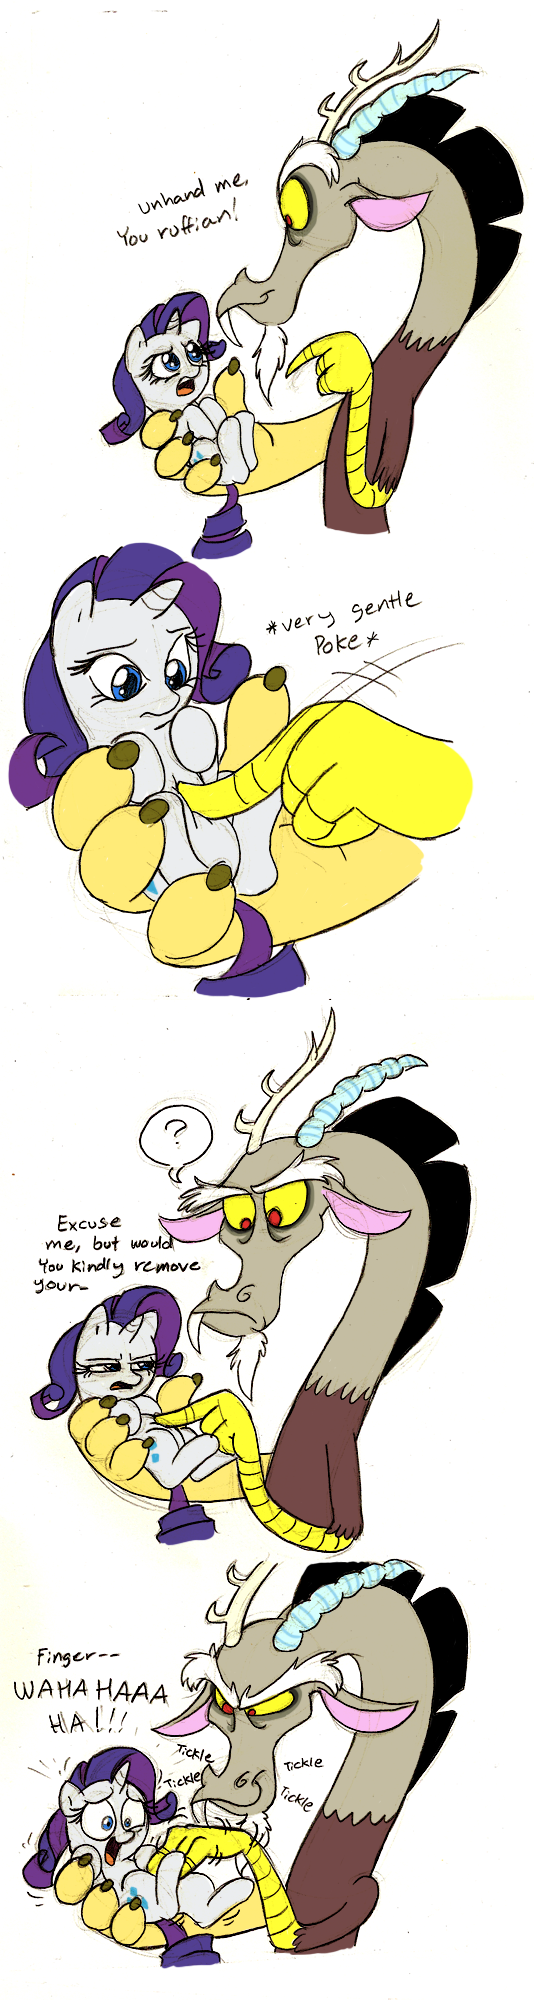 Rest Of The Squeeze/Tickle Discord Comics image - Bronies of Moddb ™.